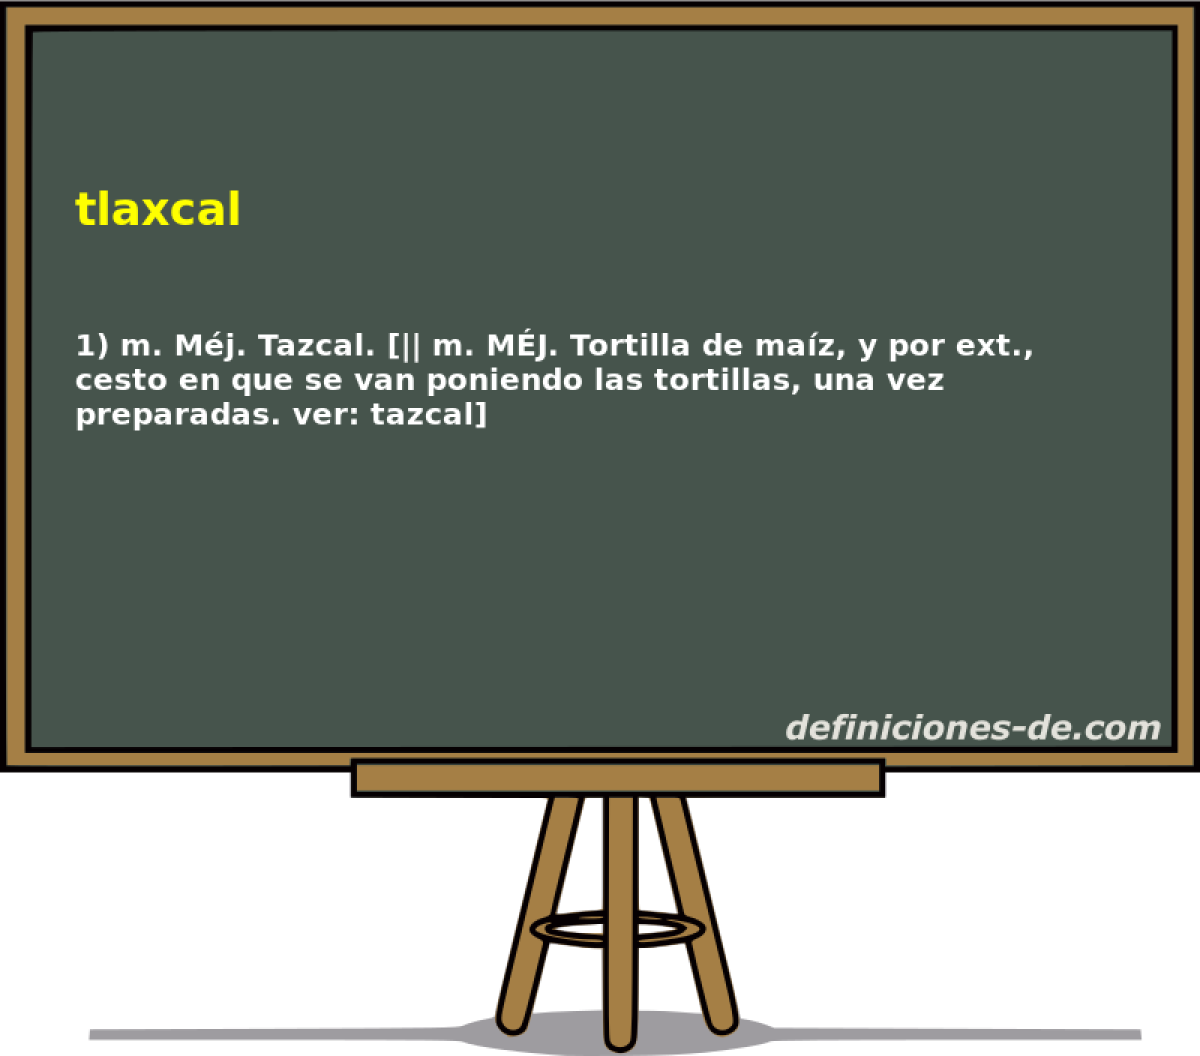 tlaxcal 